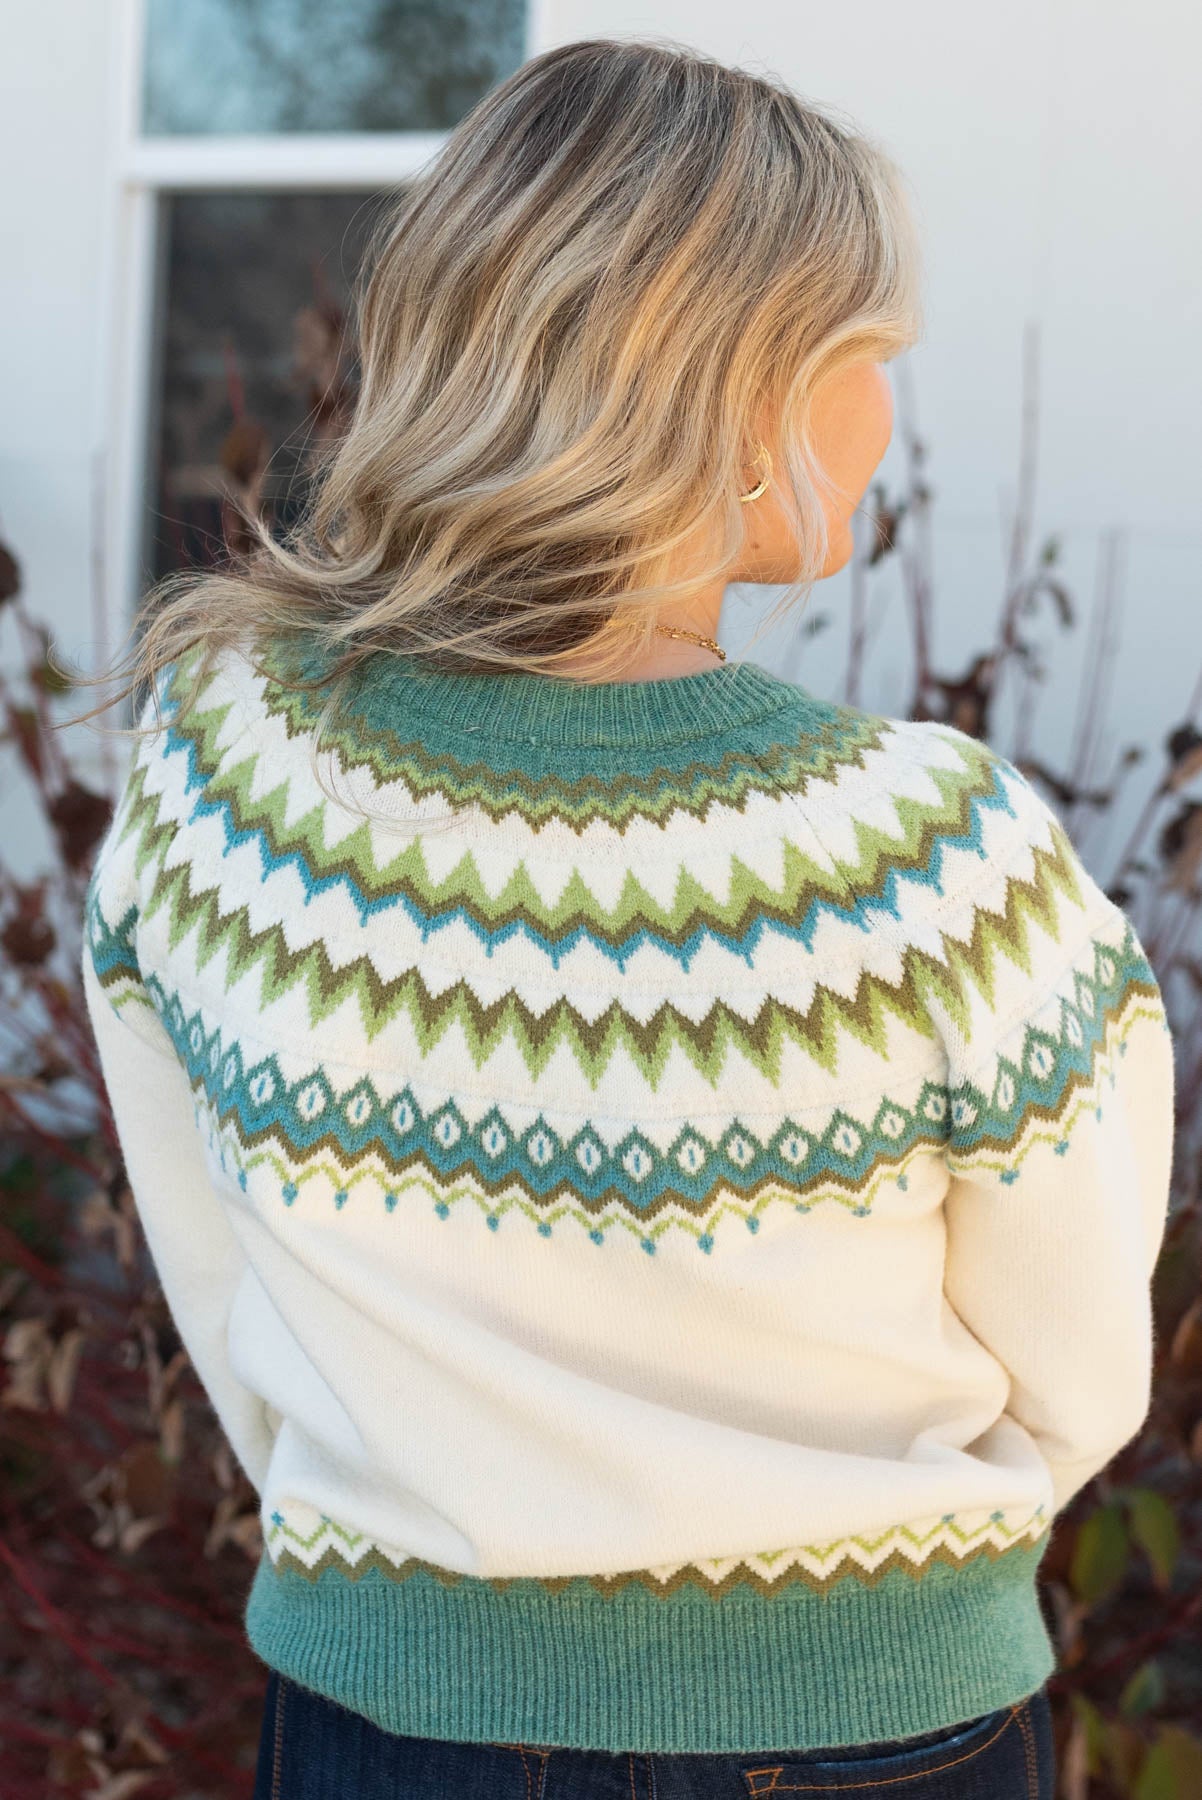 Back view of the cream patter sweater